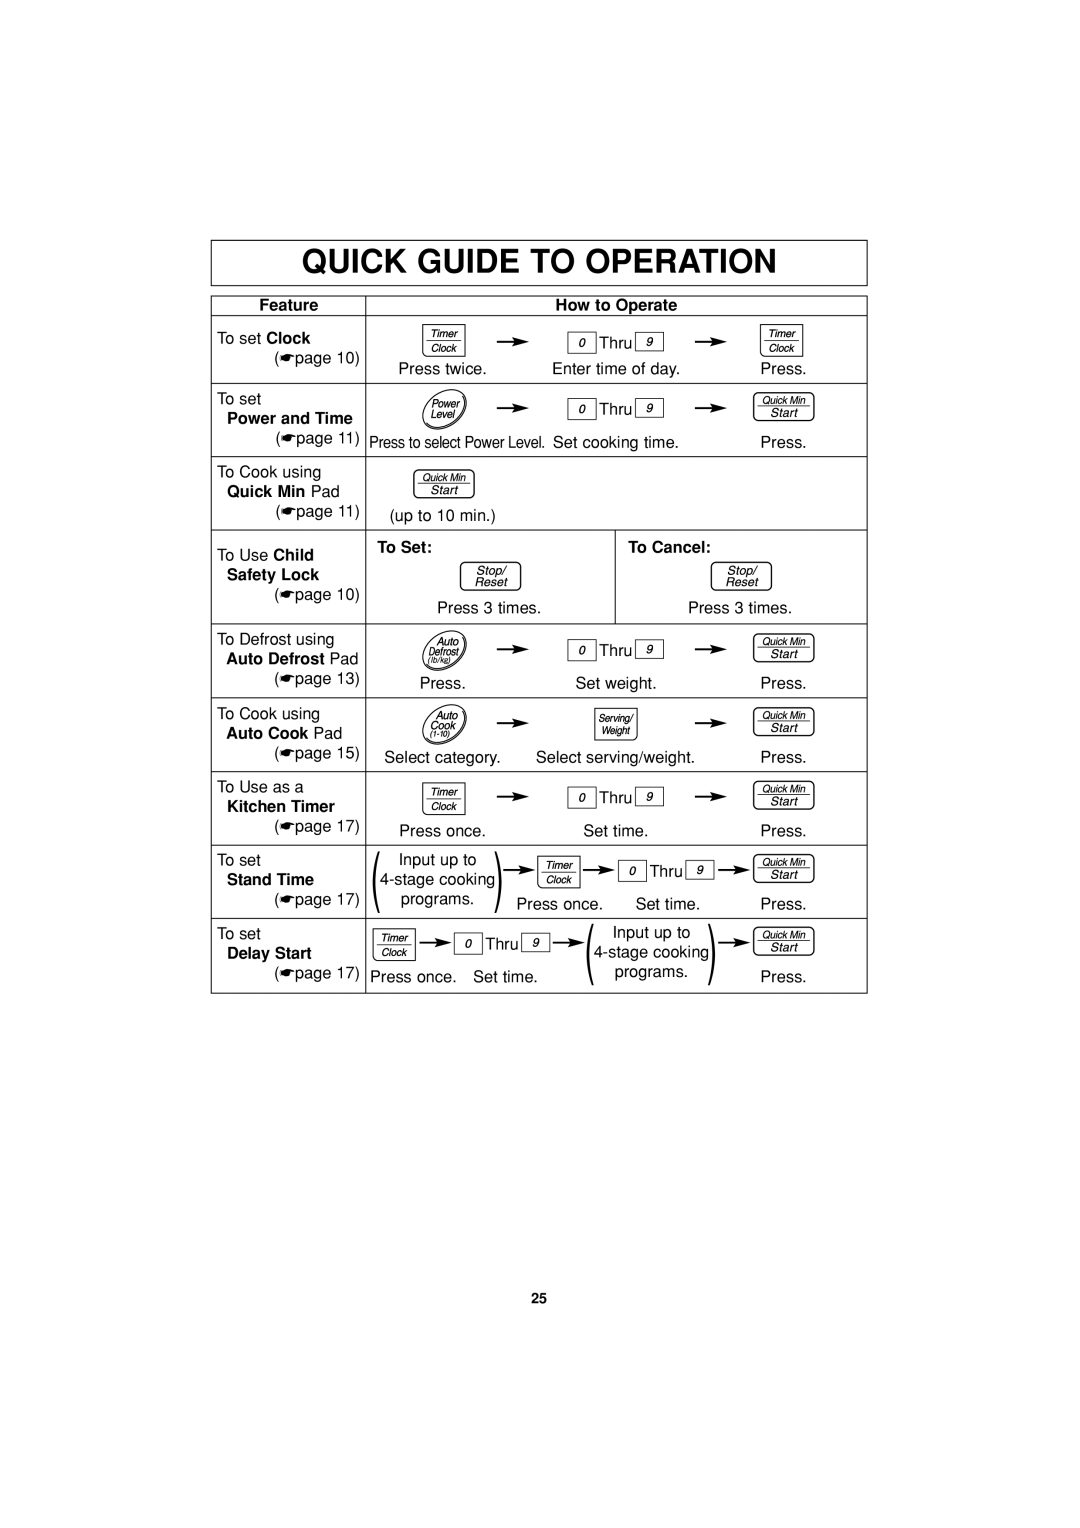 Panasonic NN-S334 Quick Guide To Operation, Feature, How to Operate, Power and Time, Quick Min Pad, To Set, To Cancel 